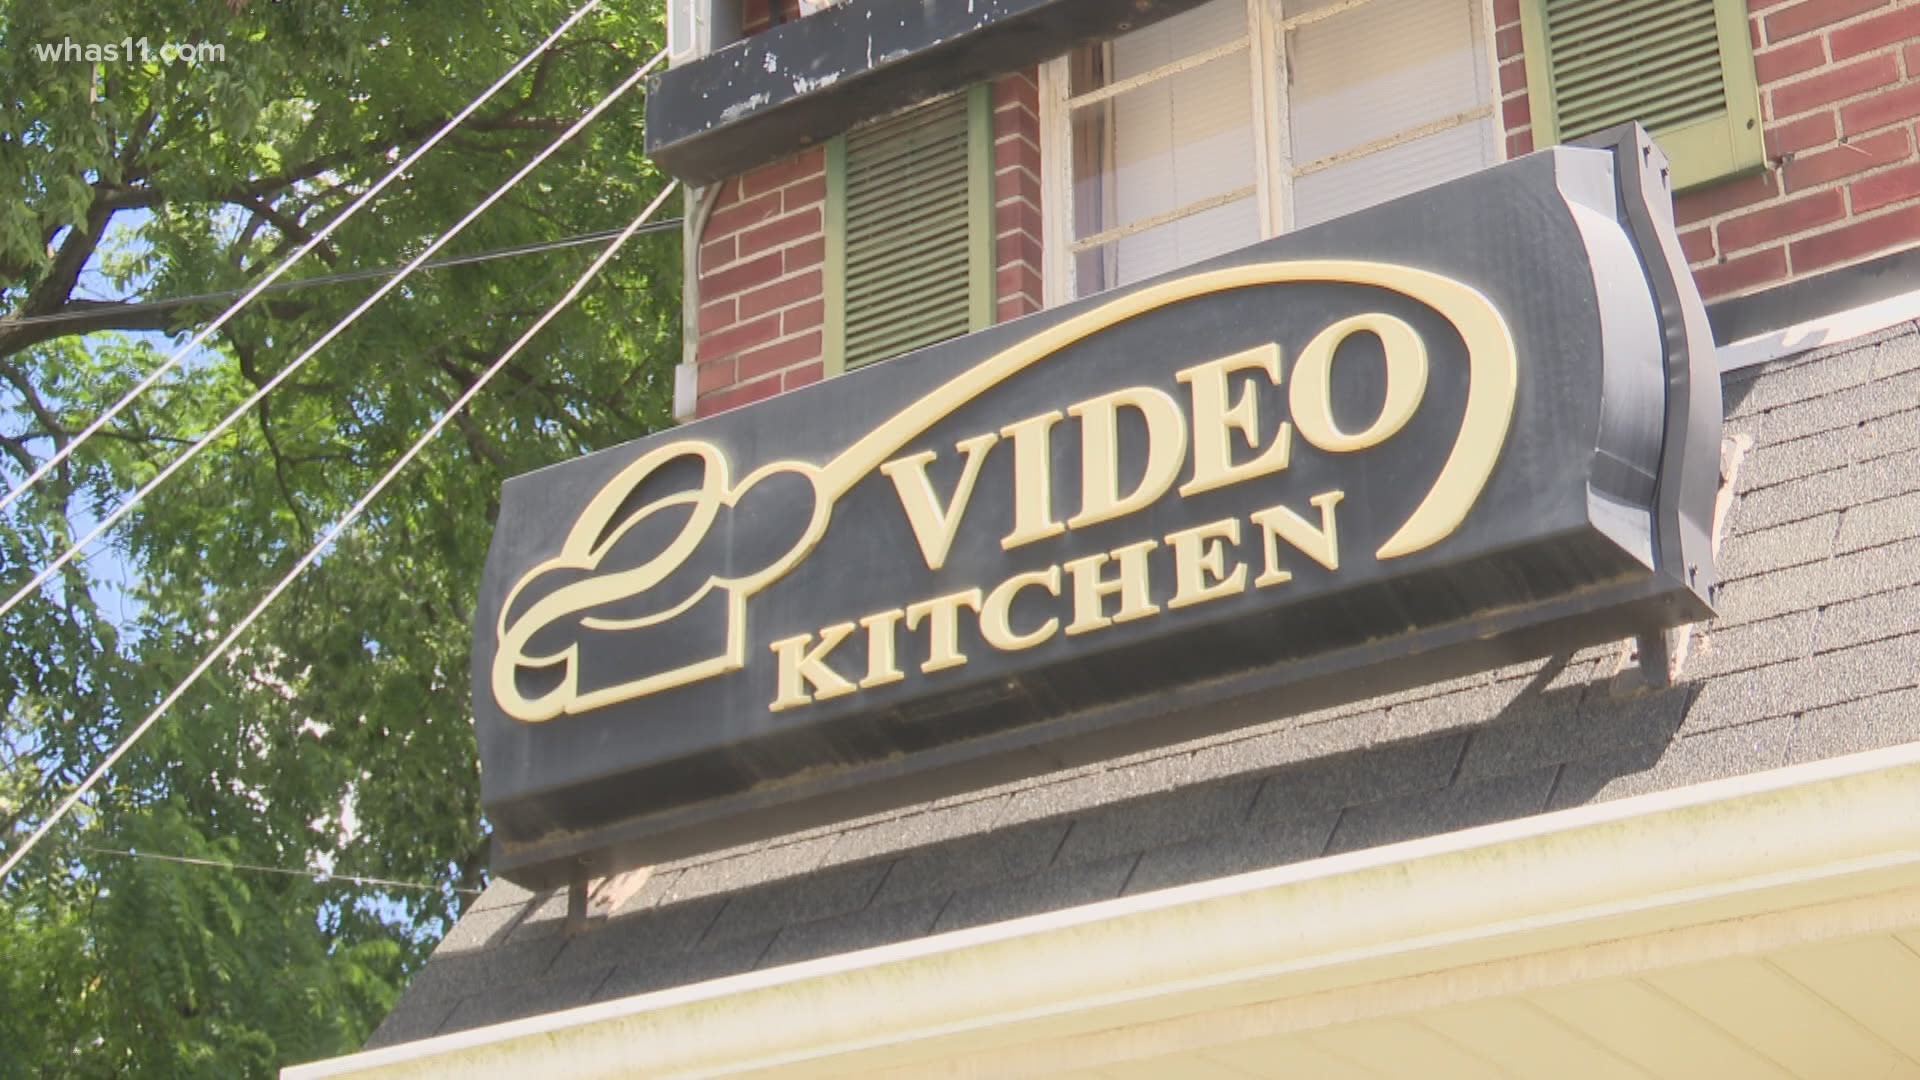 The owner of Video Kitchen says someone stole her car keys and then drove off while she was working inside.